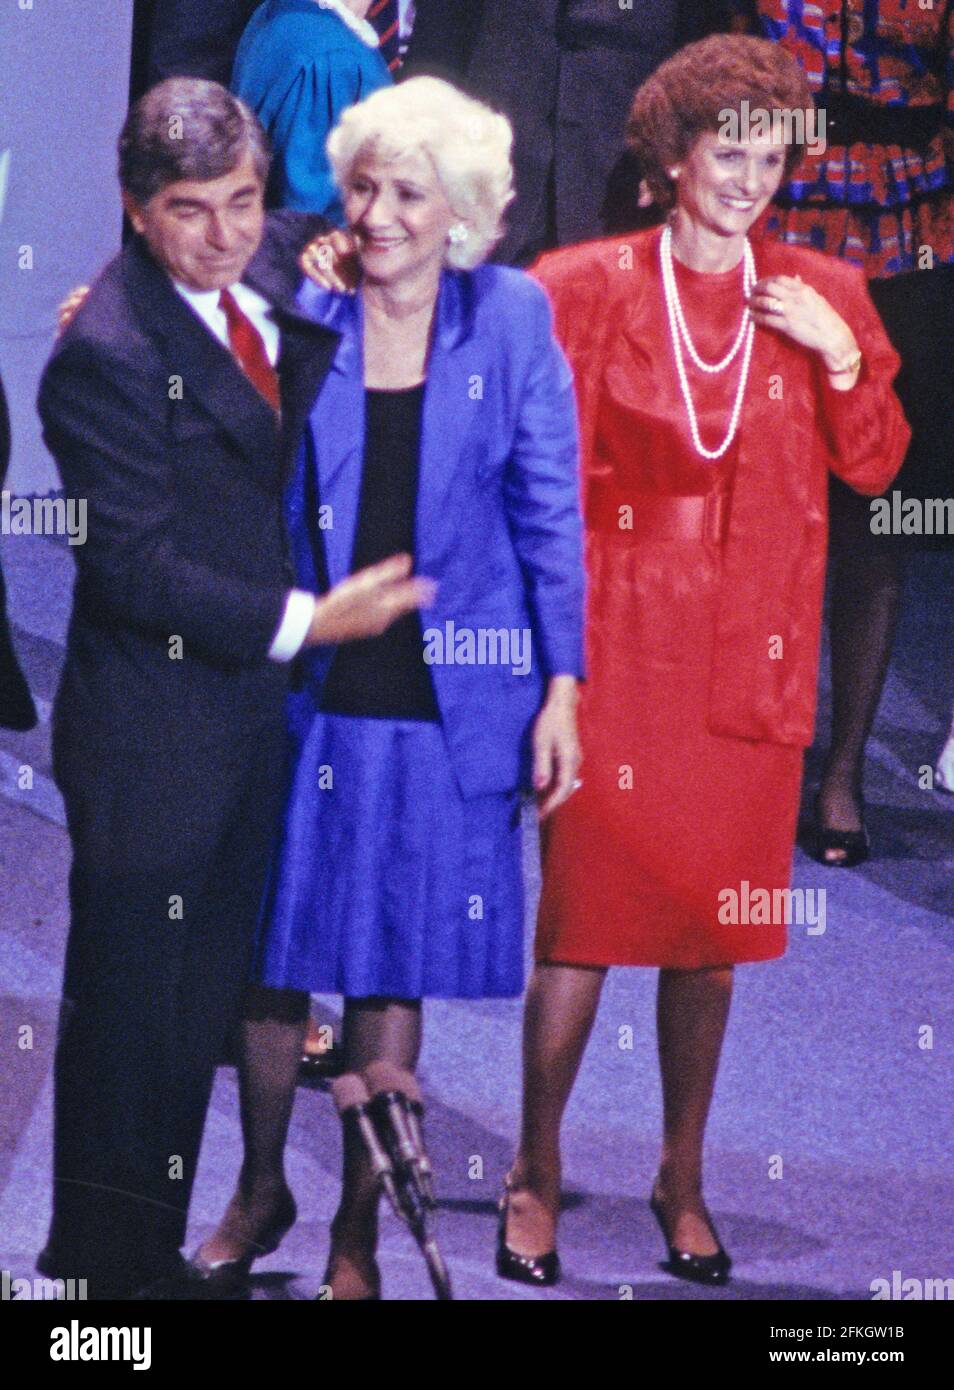 Oscar Award-winning actress Olympia Dukakis, appears with her cousin, Governor Michael Dukakis (Democrat of Massachusetts), the 1988 Democratic Party nominee for President of the United States, at the 1988 Democratic National Convention in the Omni Coliseum in Atlanta, Georgia on July 21, 1988. Kitty Dukakis is a right in the red dress. Credit: Arnie Sachs/CNP/Sipa USA Credit: Sipa USA/Alamy Live News Stock Photo